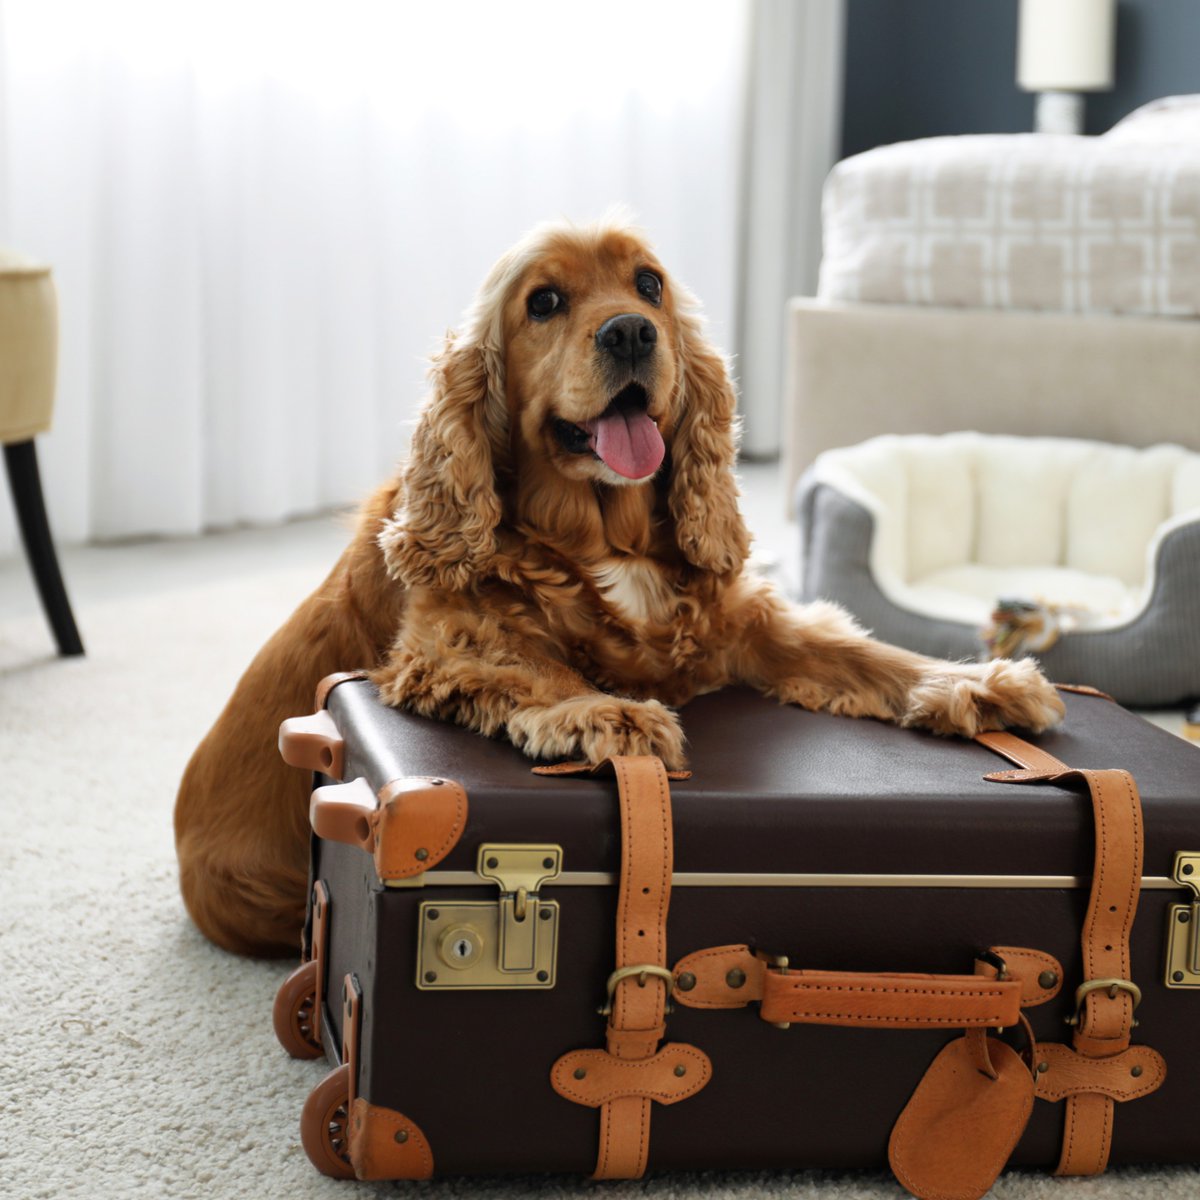 Traveling with your furry friend? 🐾 Beach Dawg Care® offers professional in-room Pet Sitting Services at your hotel or resort!  🏖️
Book now at 
beachdawgcare.com/hotel-pet-sitt…

 #PetSitting #BeachDawgCare #TravelWithPets